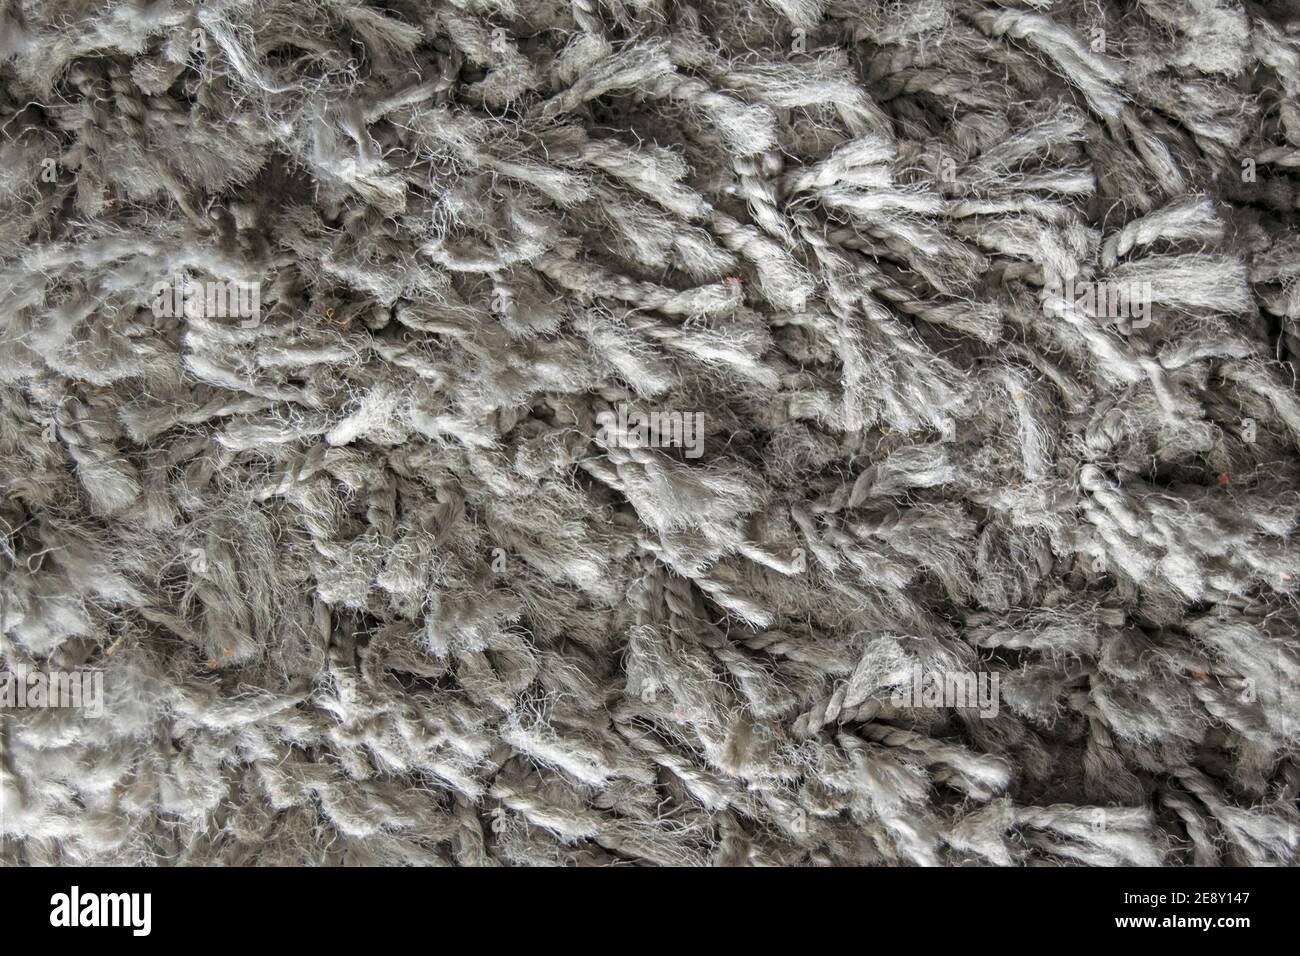 Texture of long hair carpet in grey, fur texture close up for designers Stock Photo